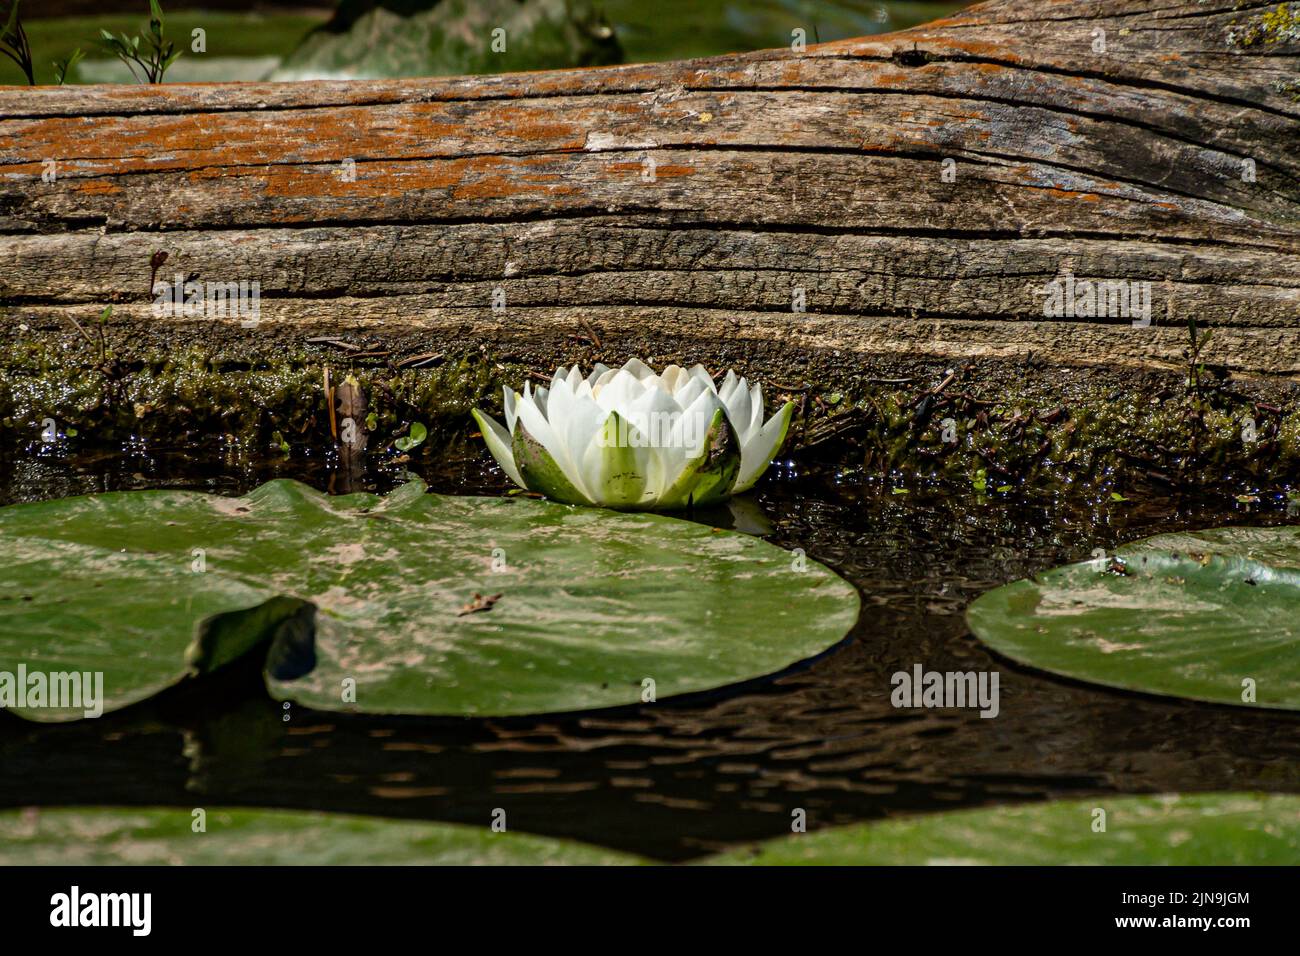 The Water Lilly Lotus and pads in Lake Ontario, Canada Stock Photo